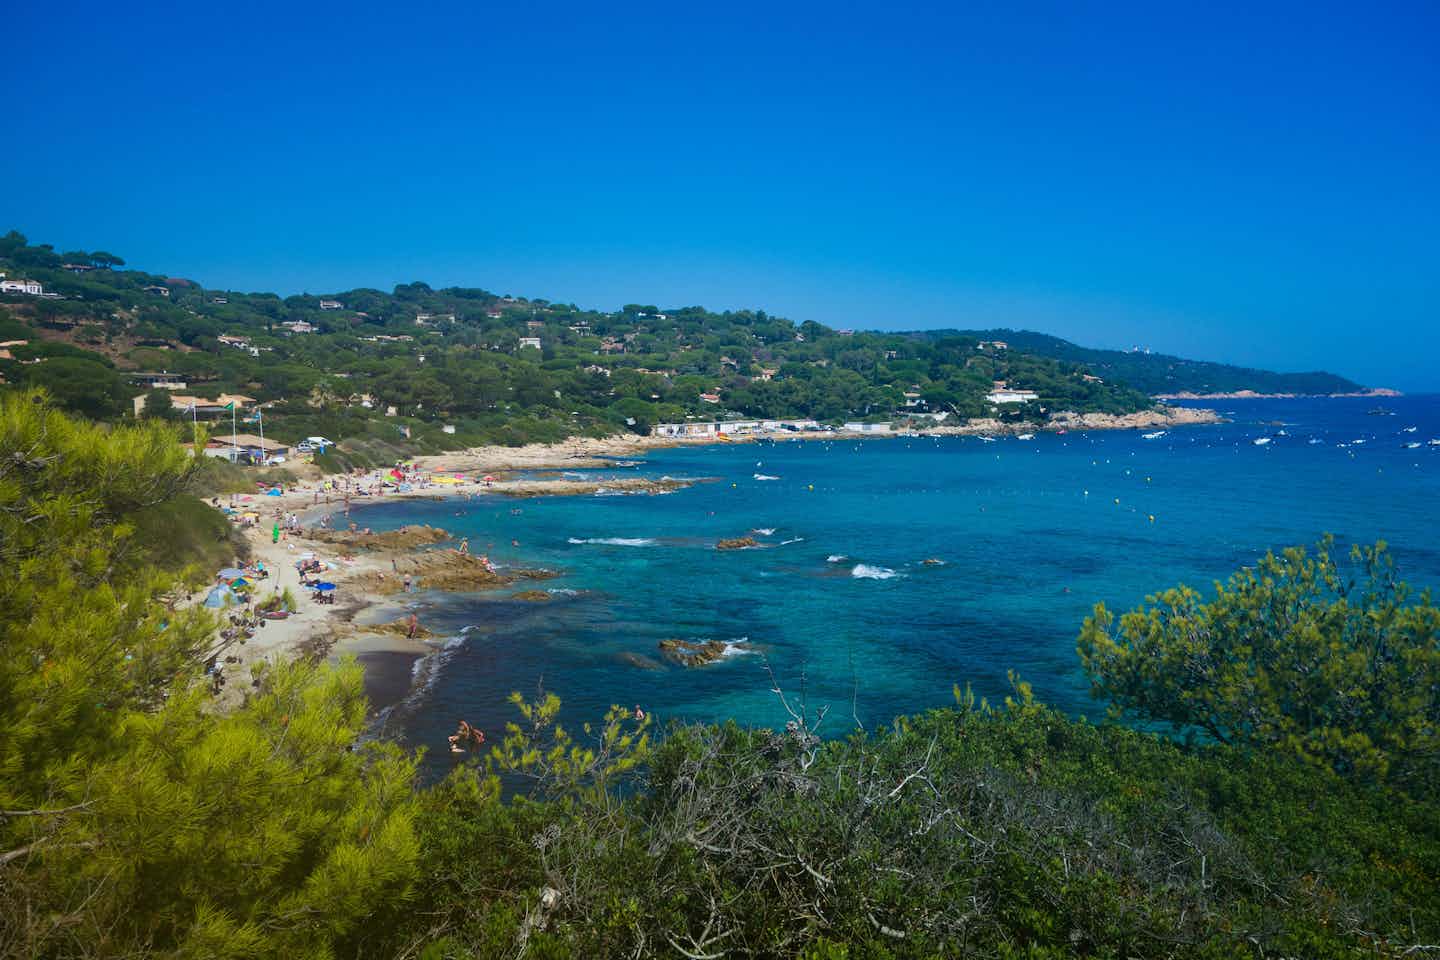 Camping am Meer in der Provence